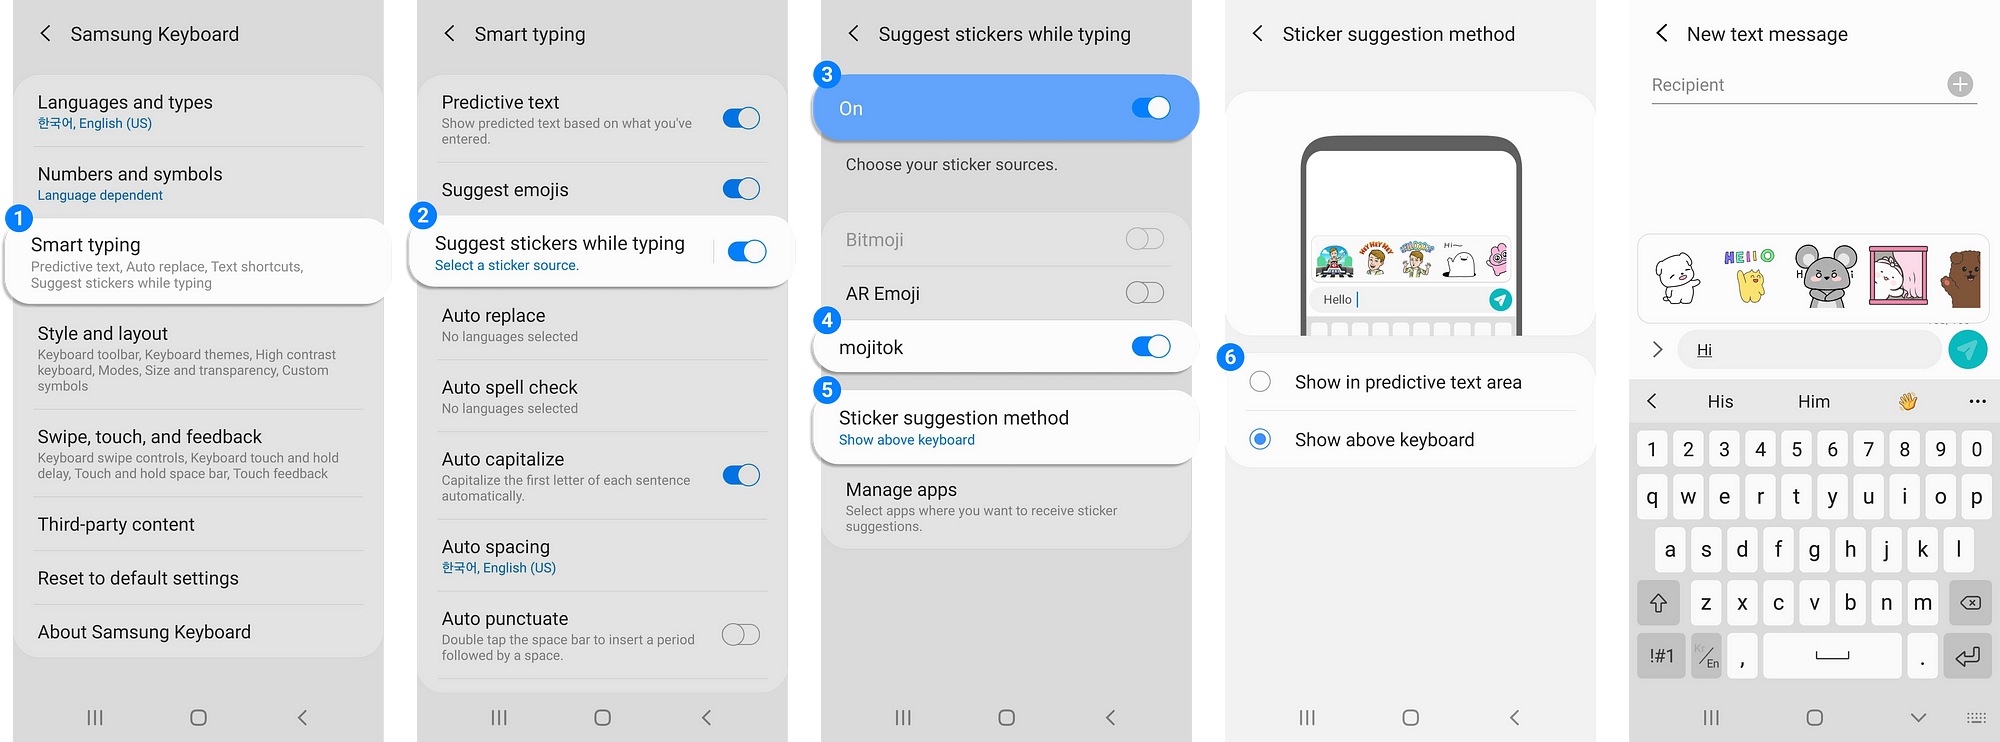 How to get stickers on Samsung phone keyboard | mojitok